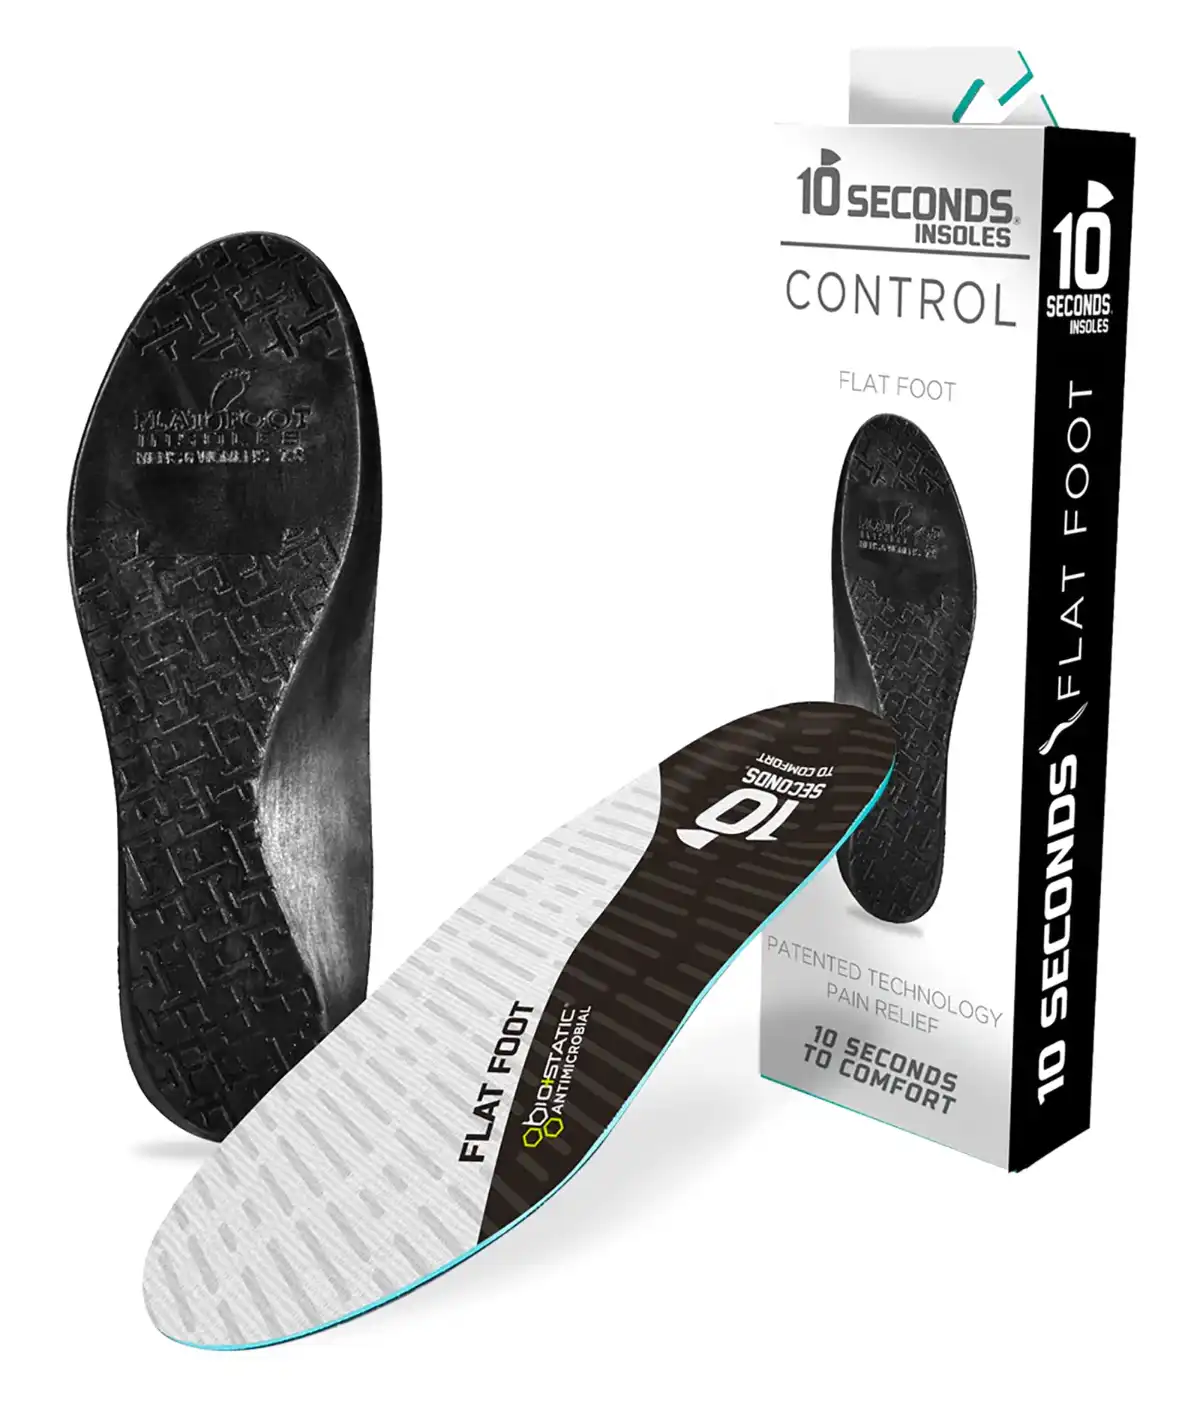 Best Insoles for Bunions and Flat Feet- 10 seconds